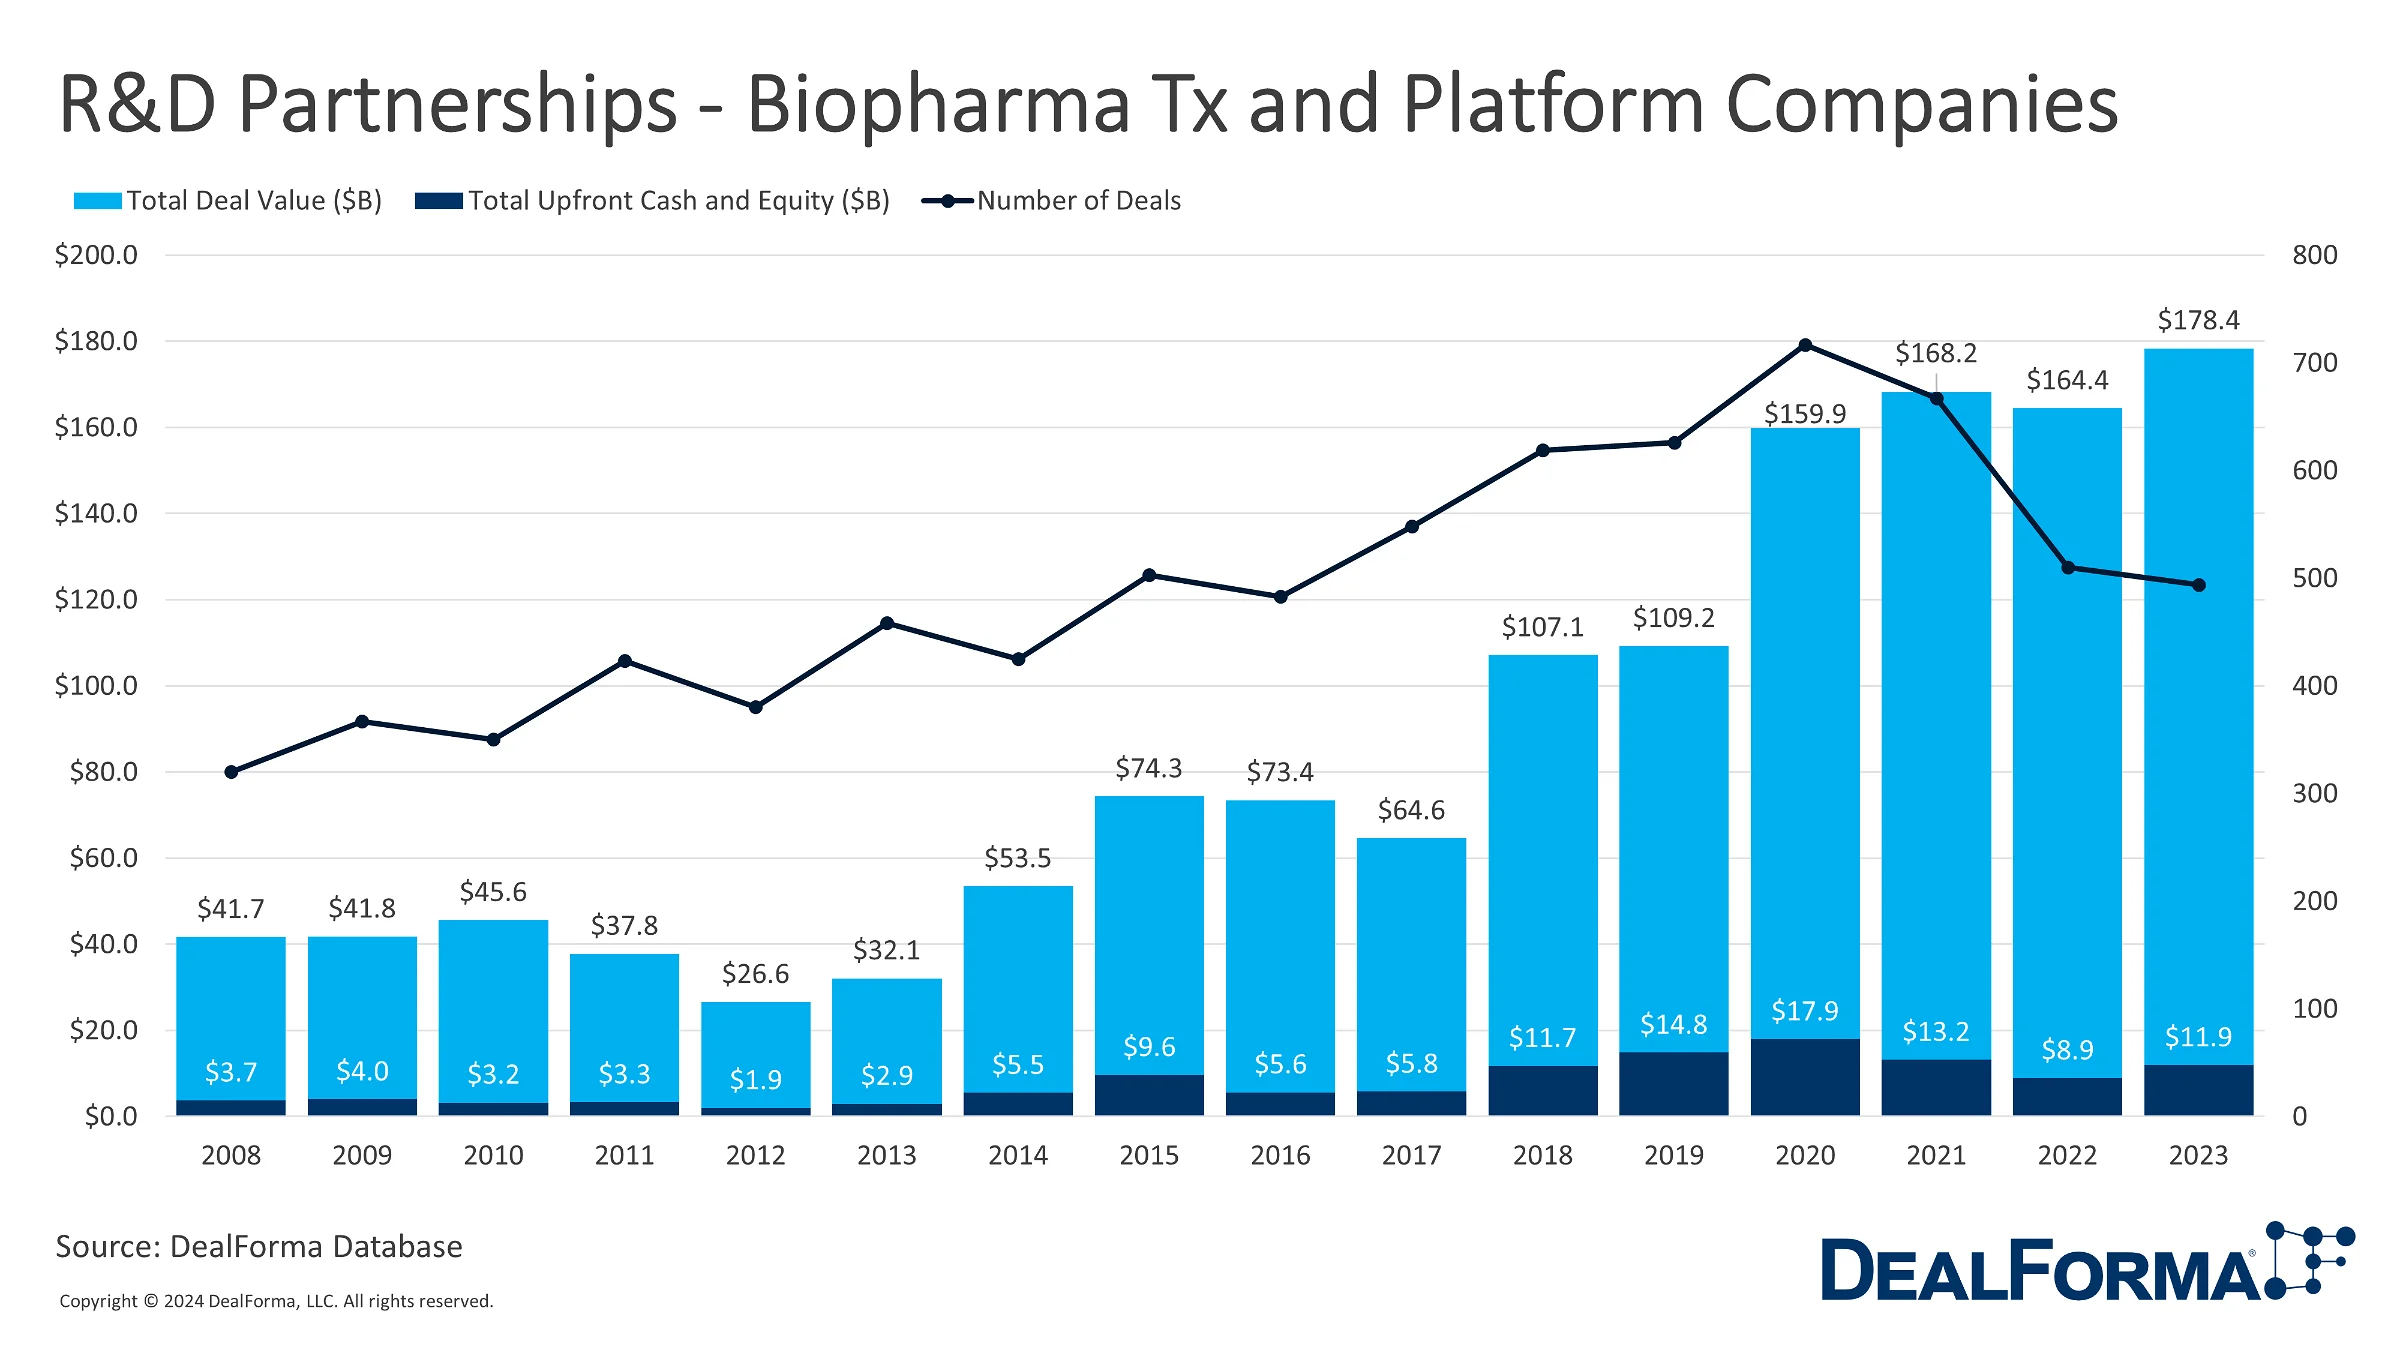 Biopharma Therapeutics And Platforms Redefining RD Partnerships For 2023